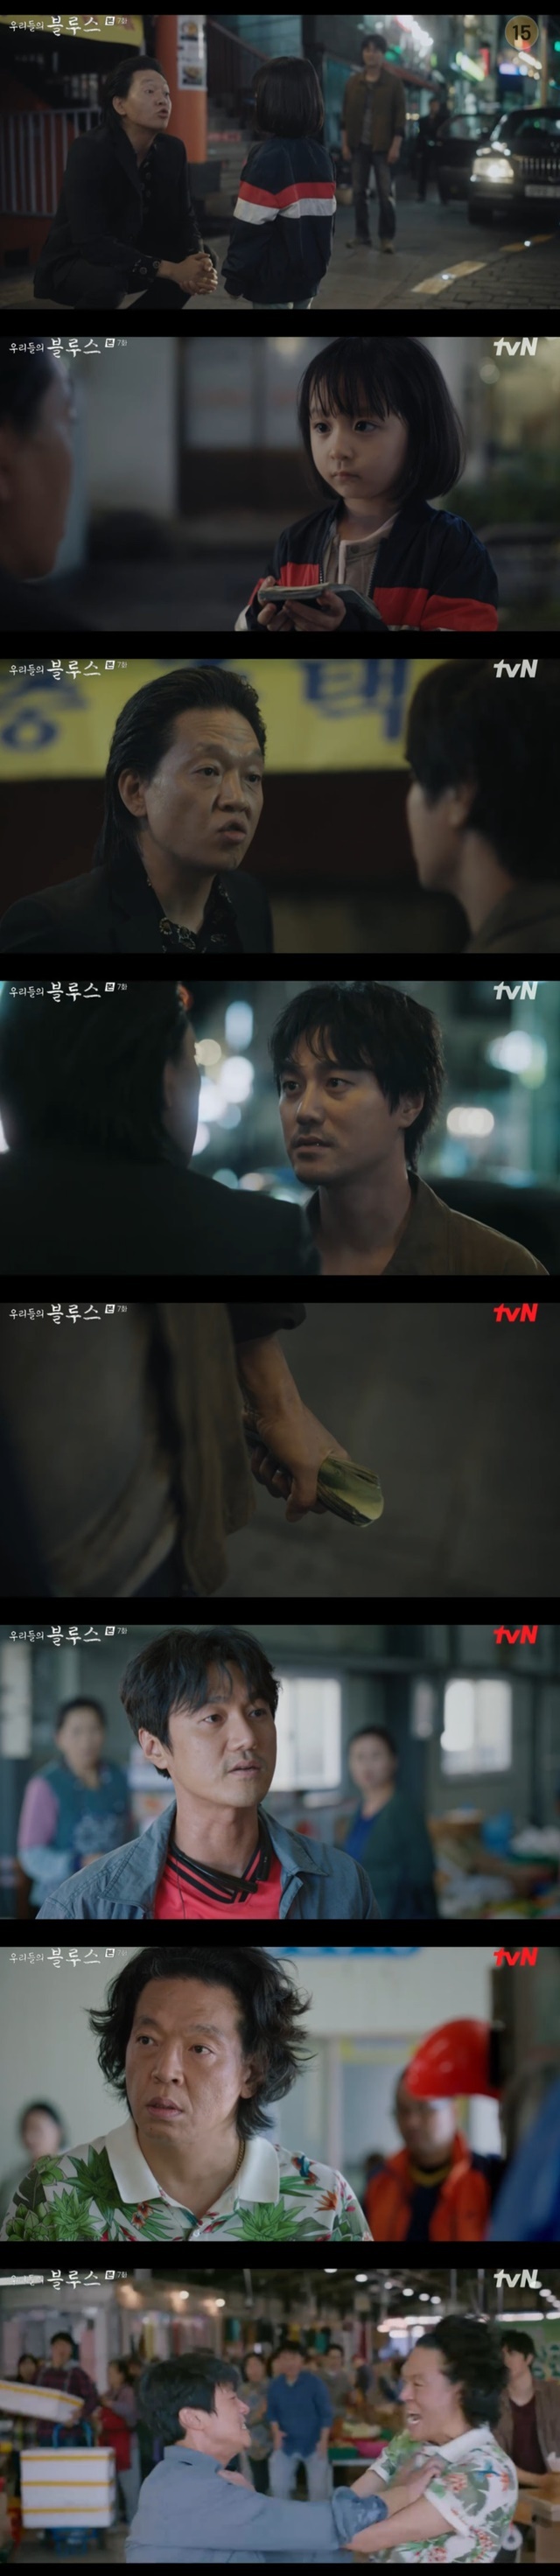 The past history of Park Ji-hwan and Choi Young-juns friendship became a mystery.In the 7th episode of TVNs Saturday Drama Our Blues (played by Noh Hee-kyung/directed by Kim Gyu-tae), which was broadcast on April 30, Choi Jung-in and Choi Young-jun clashed over their childrens pregnancy problems.On the day of the show, 18-year-old Jung Hyun (Bae Hyun-sung) and airing stock (Roh Yoon-seo) confessed their six months of pregnancy and asked for help, and their father Choi Jung-in and the protection ceremony were angry and punched each other.Along with him, the past history of the past between Choi Jung-in and the protection ceremony, which was the best friend of the past, was unfolded.When Choi Jung-in was assaulted, he took a fire extinguisher, helped him, and ran away together.Choi Jung-in, who became an adult and became a gangster, kneeled when the protection ceremony was strangled by someone, saying, Hosik is a gambler, not a shoulder.The escape ceremony was called Fire! And brought the police to save Choi Jung-in, and Choi Jung-in was covered in blood and said, If you grow up in the lord, lets take our company.The defense ceremony said, It is a stone now, but it is big. So, brother, lets make up for it.But the two people who were so sticky collapsed with a repeated gambling of protection and a word of Choi Jung-in.The protection ceremony was held after seeing the starving young daughter airing stock after her wife ran away from gambling, and Choi Jung-in said to Choi Jung-in, The last time.Help me this time, he said.When Choi Jung-in responded, The last time was the last time, did not I tell you not to gamble?The lord did not eat rice, he said, appealing that his daughter, airing stock, was starving.Choi Jung-in told the young airing stock, Please give me the Uncle money, and when the airing stock said, Please give me the Uncle money, he gave me the money.Choi Jung-in said to the defense ceremony, I would like to have your daughter in front of the angry, you bitch.So Choi Jung-in left the money and vitriolic, and the protection ceremony was angry with the money given by Choi Jung-in.